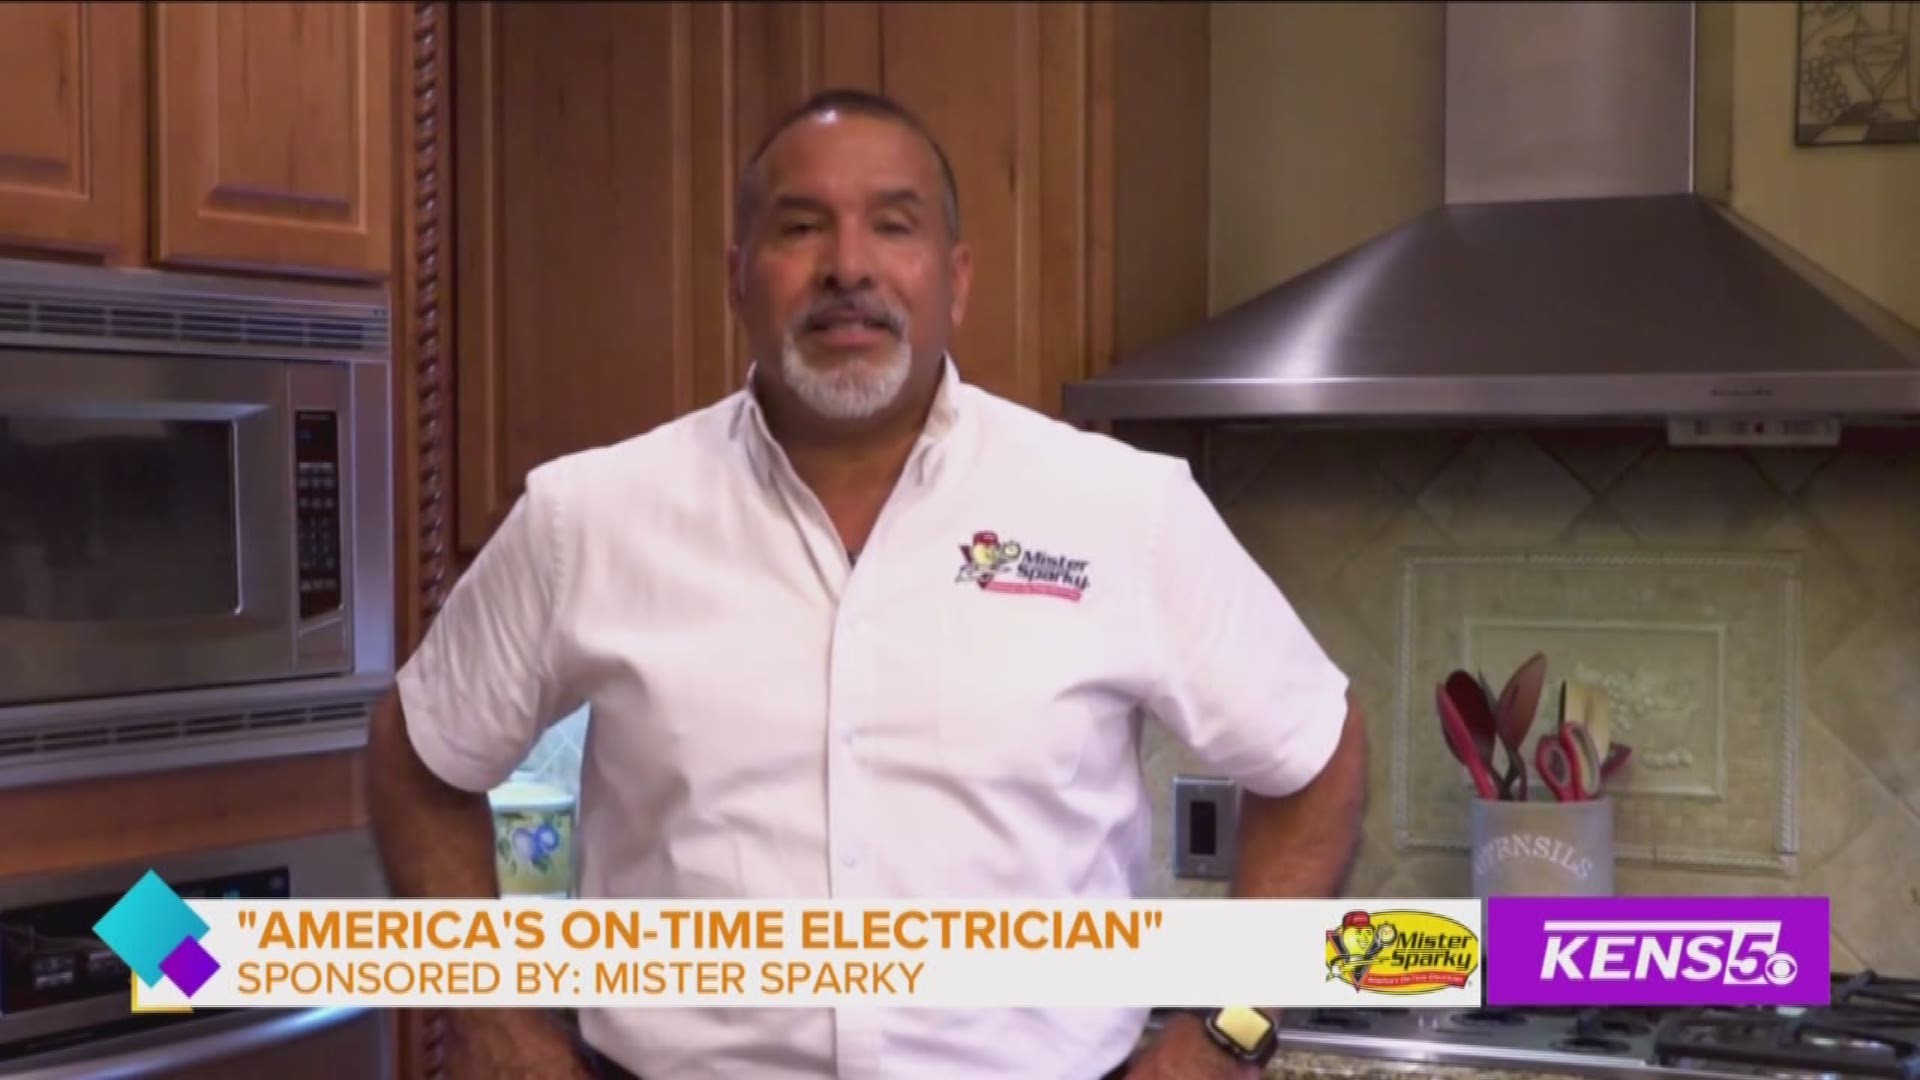 If you've been wanting to get some electrical repair work done around the house but you also want to be safe while doing it, Mister Sparky has you covered!